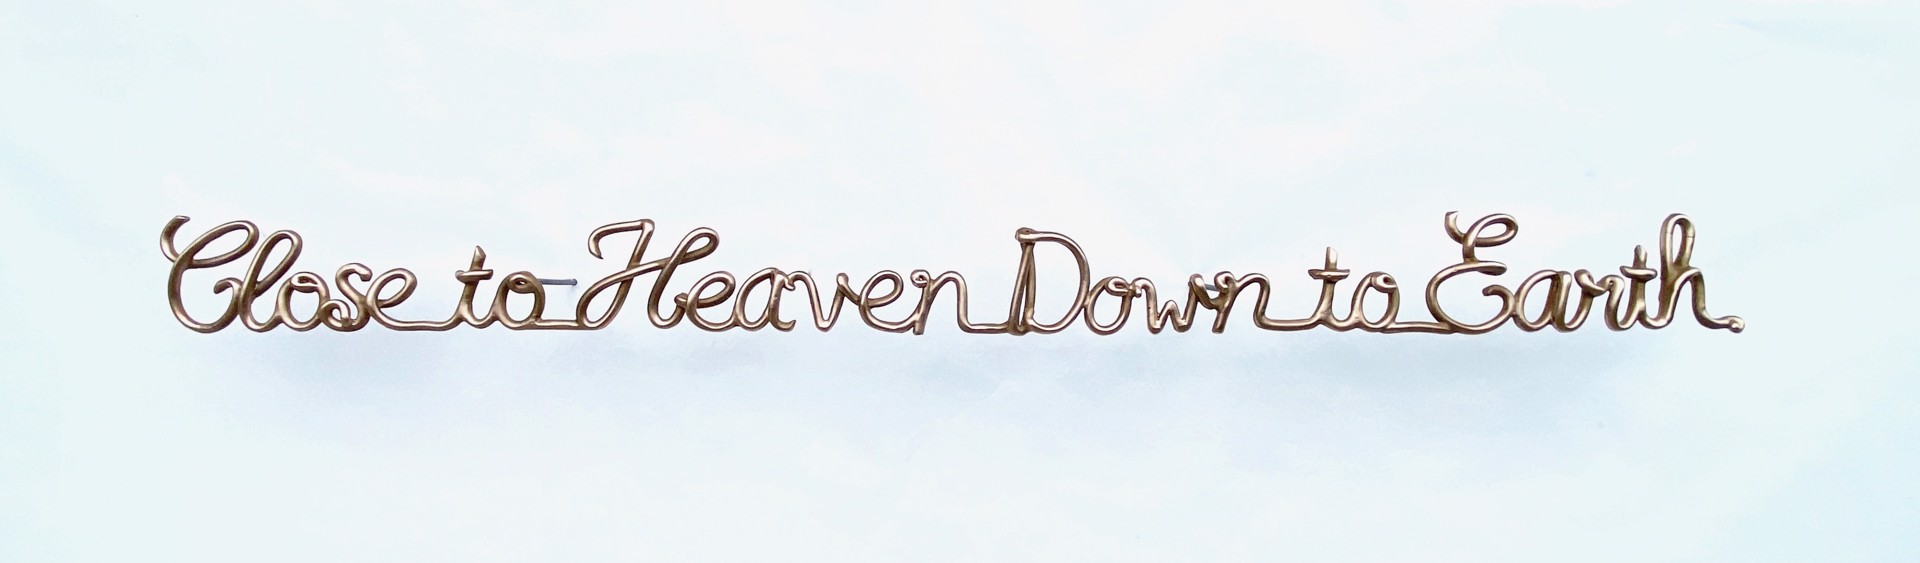 Close to Heaven, Down to Earth by Tara Conley